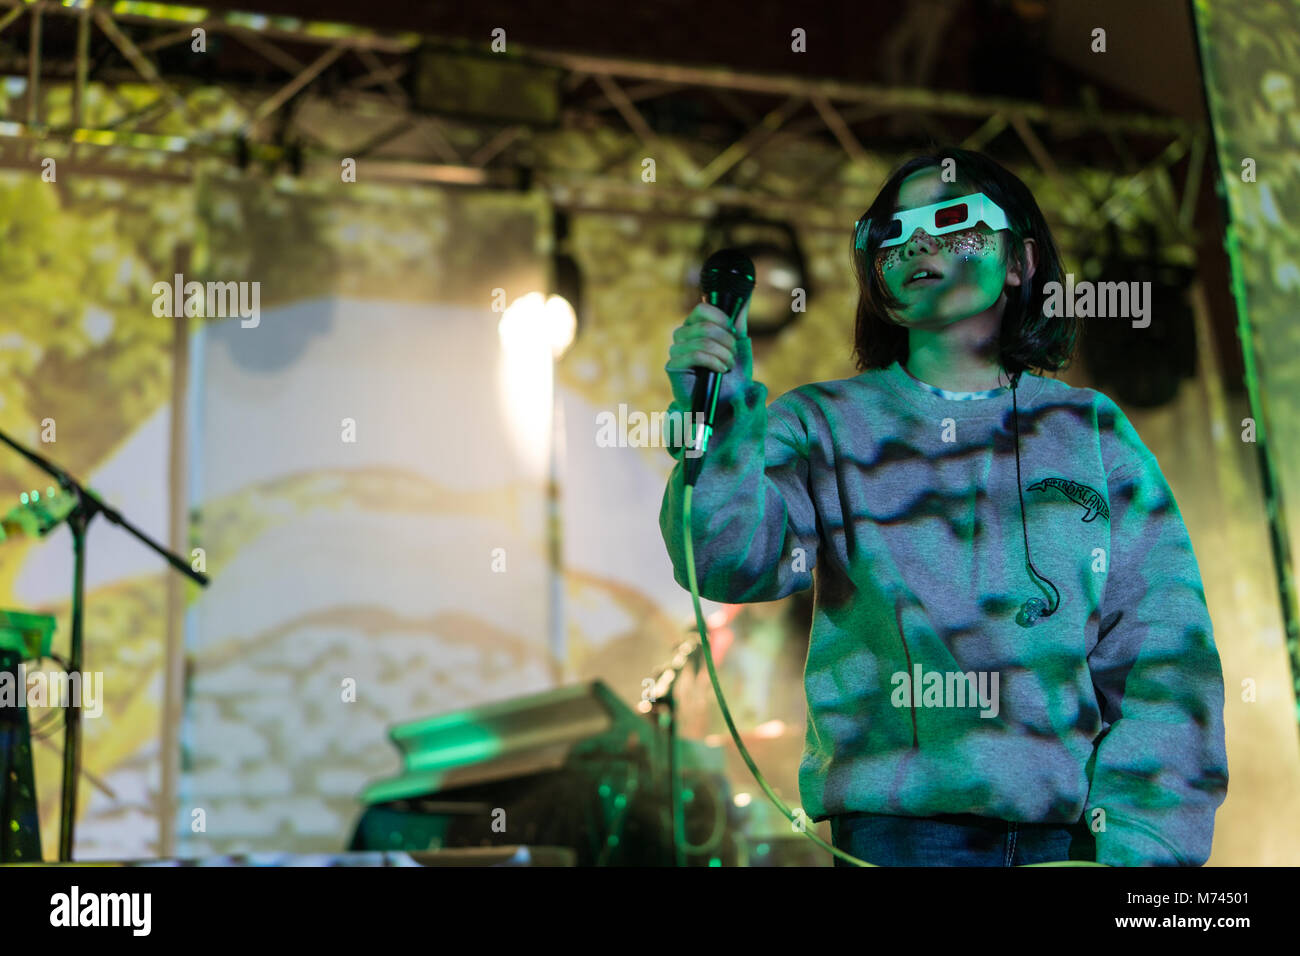 London, UK. 8th March, 2018. Orono Noguchi of Superorganism performing live on stage at Oval Space in London. Photo date: Thursday, March 8, 2018. Credit: Roger Garfield/Alamy Live News Stock Photo